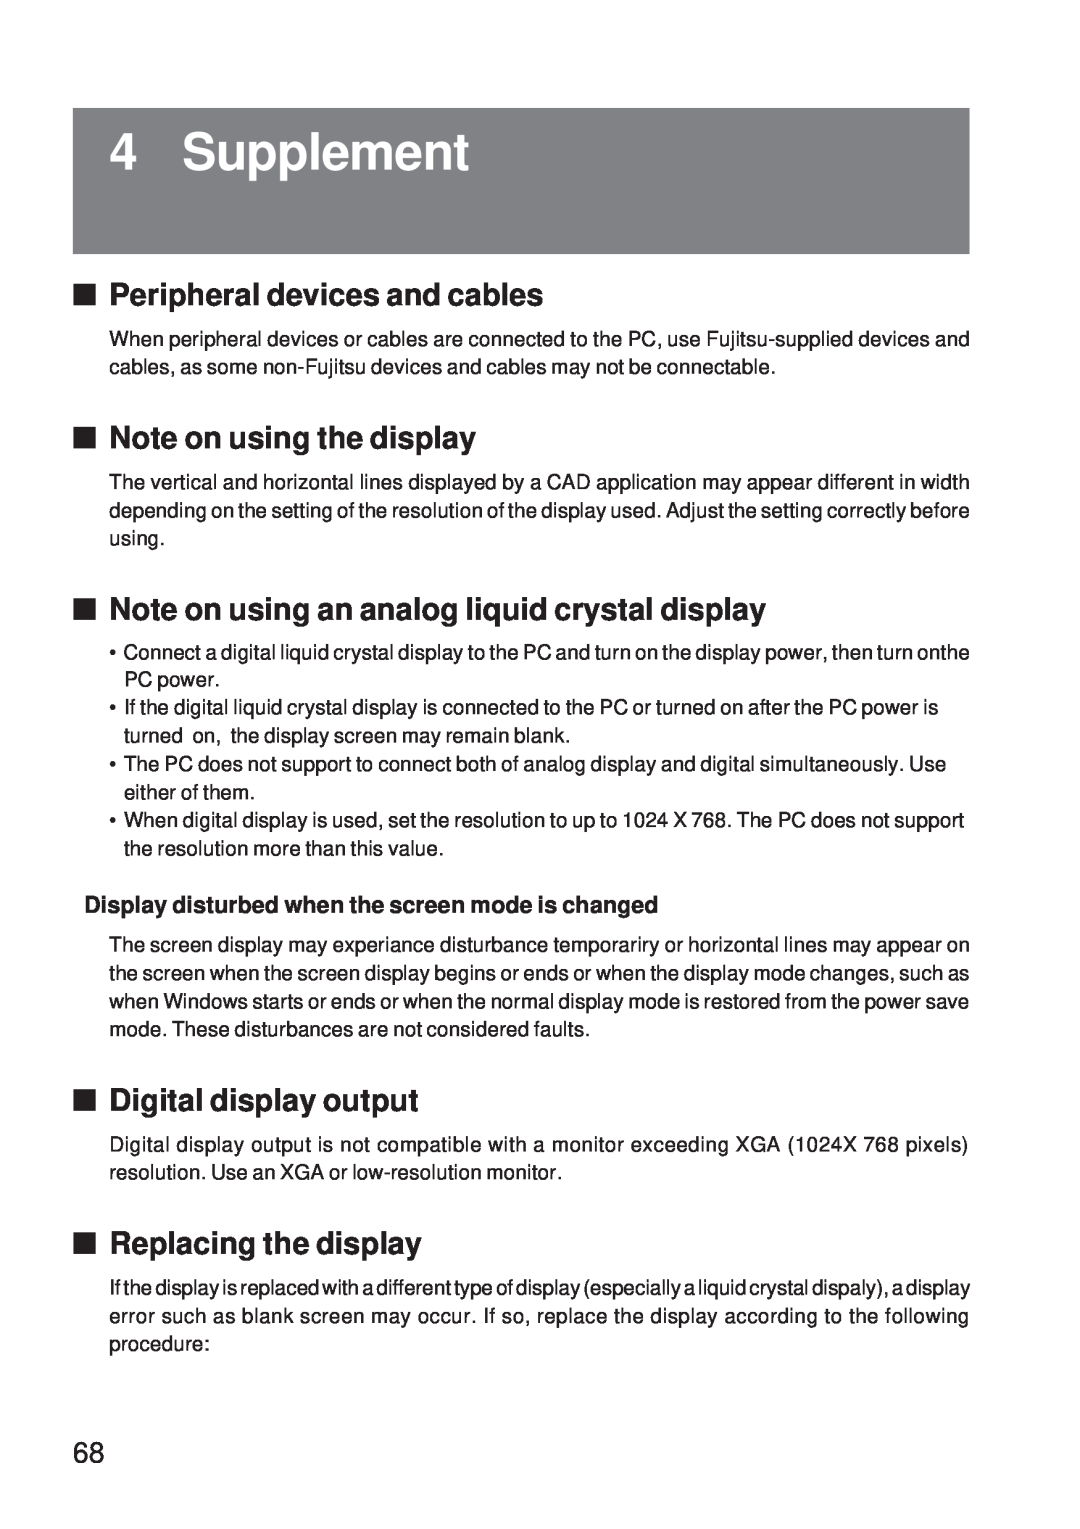 Fujitsu 5000 user manual Supplement, Peripheral devices and cables, Note on using the display, Digital display output 